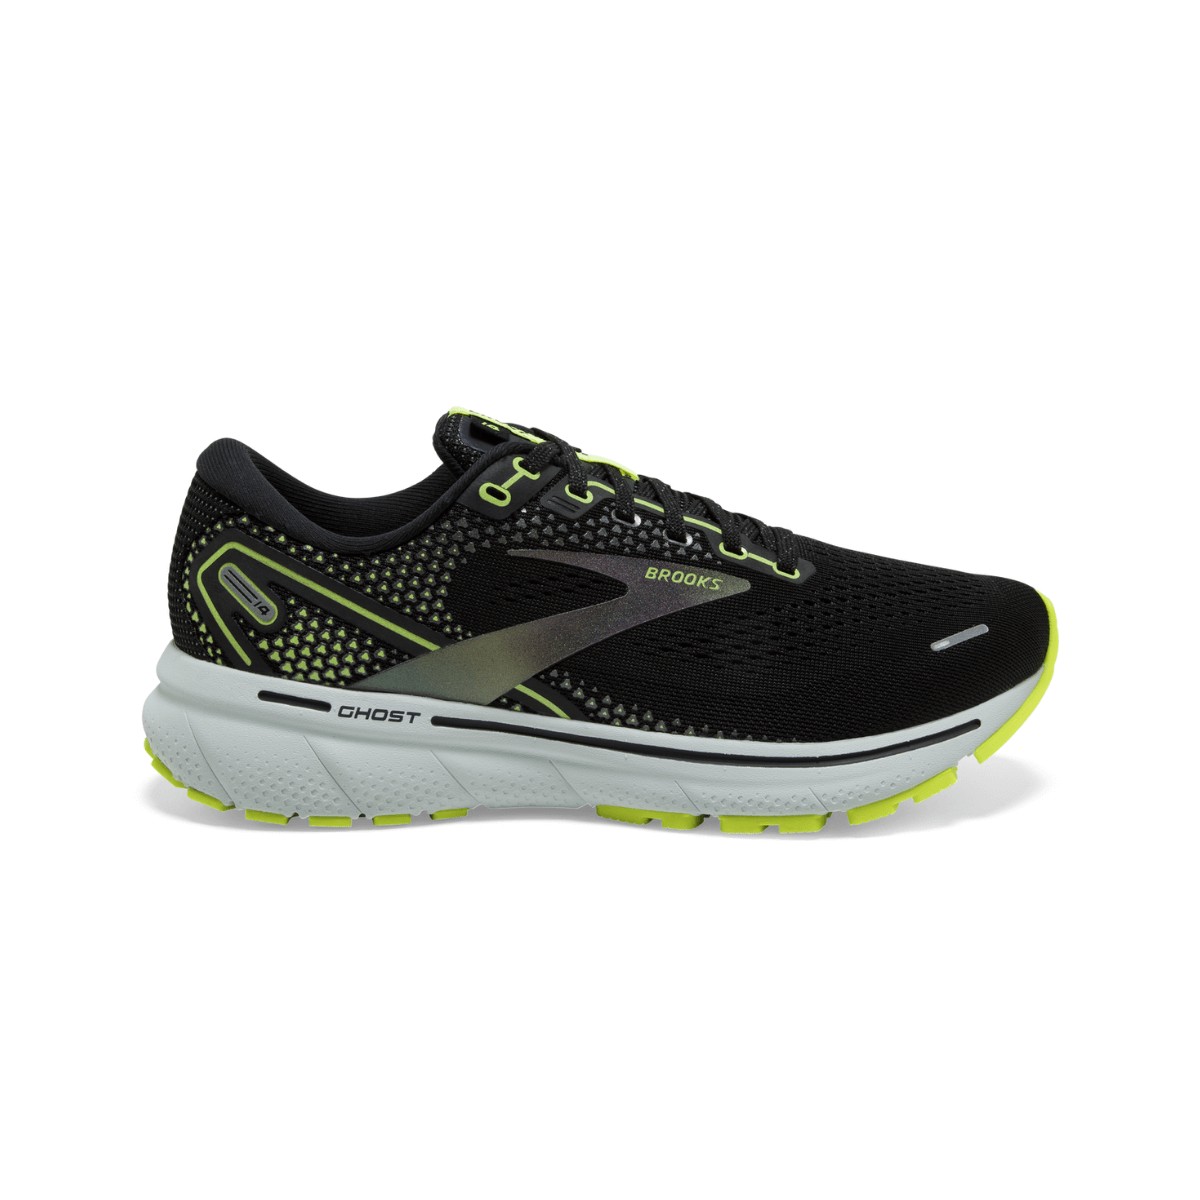 Brooks Ghost 14 Shoes Black Yellow AW21, Size 42 - EUR